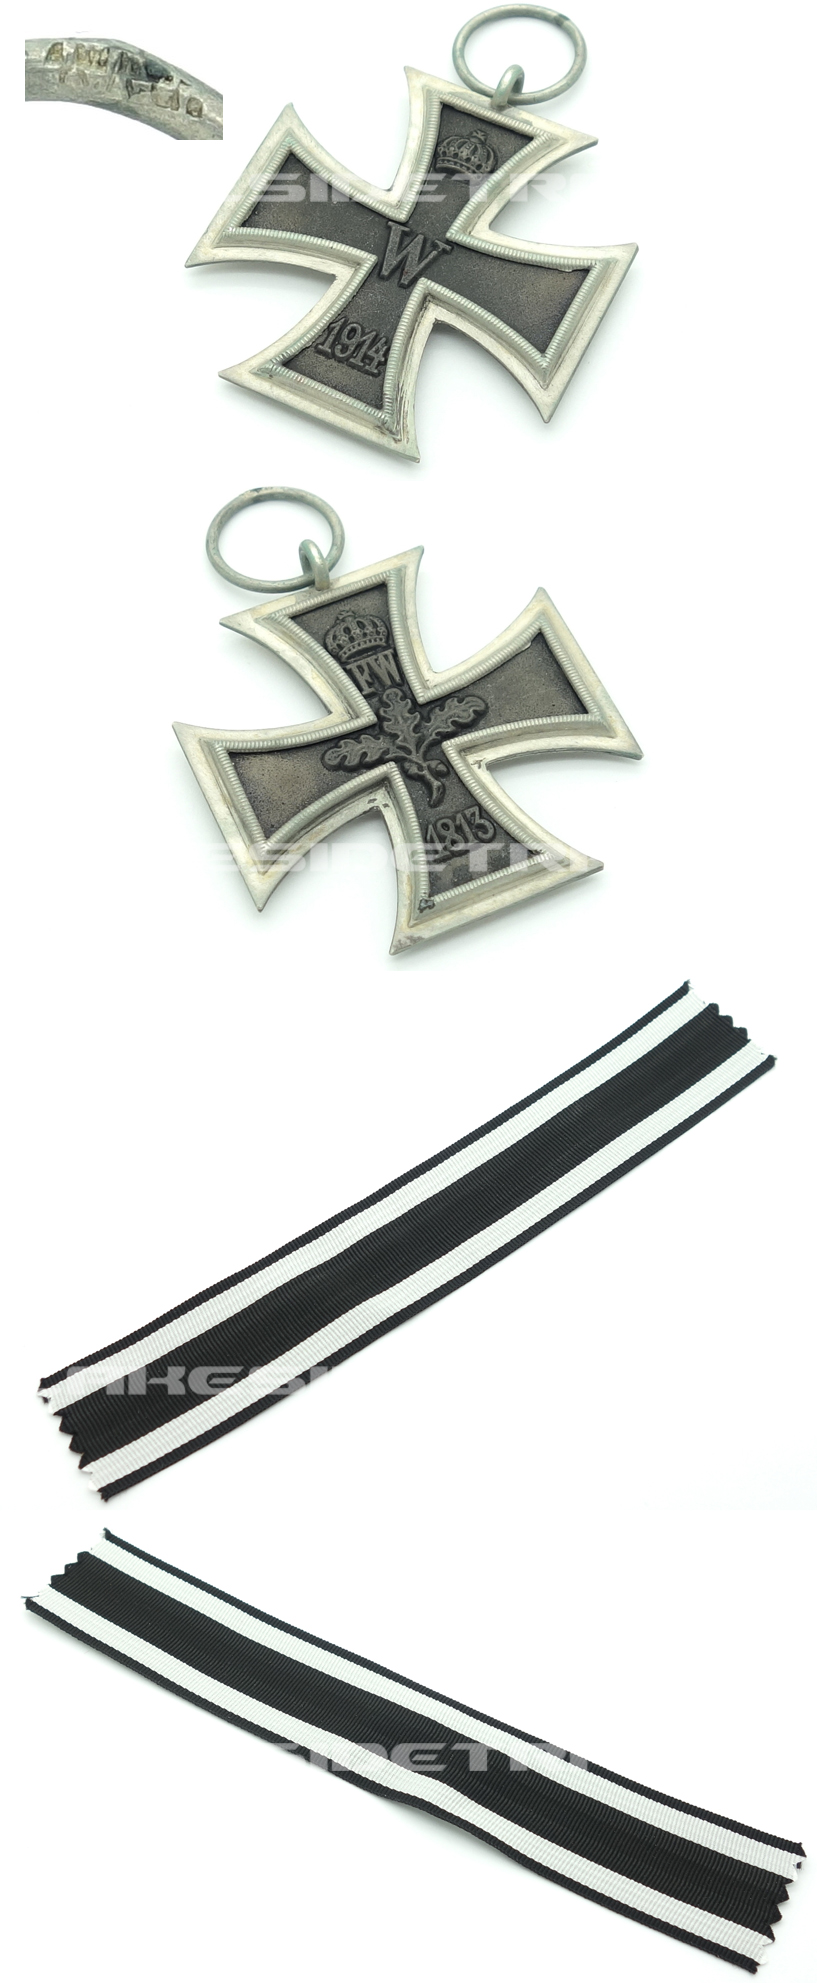 Imperial 2nd Class Iron Cross by K.A.G. | Lakesidetrader